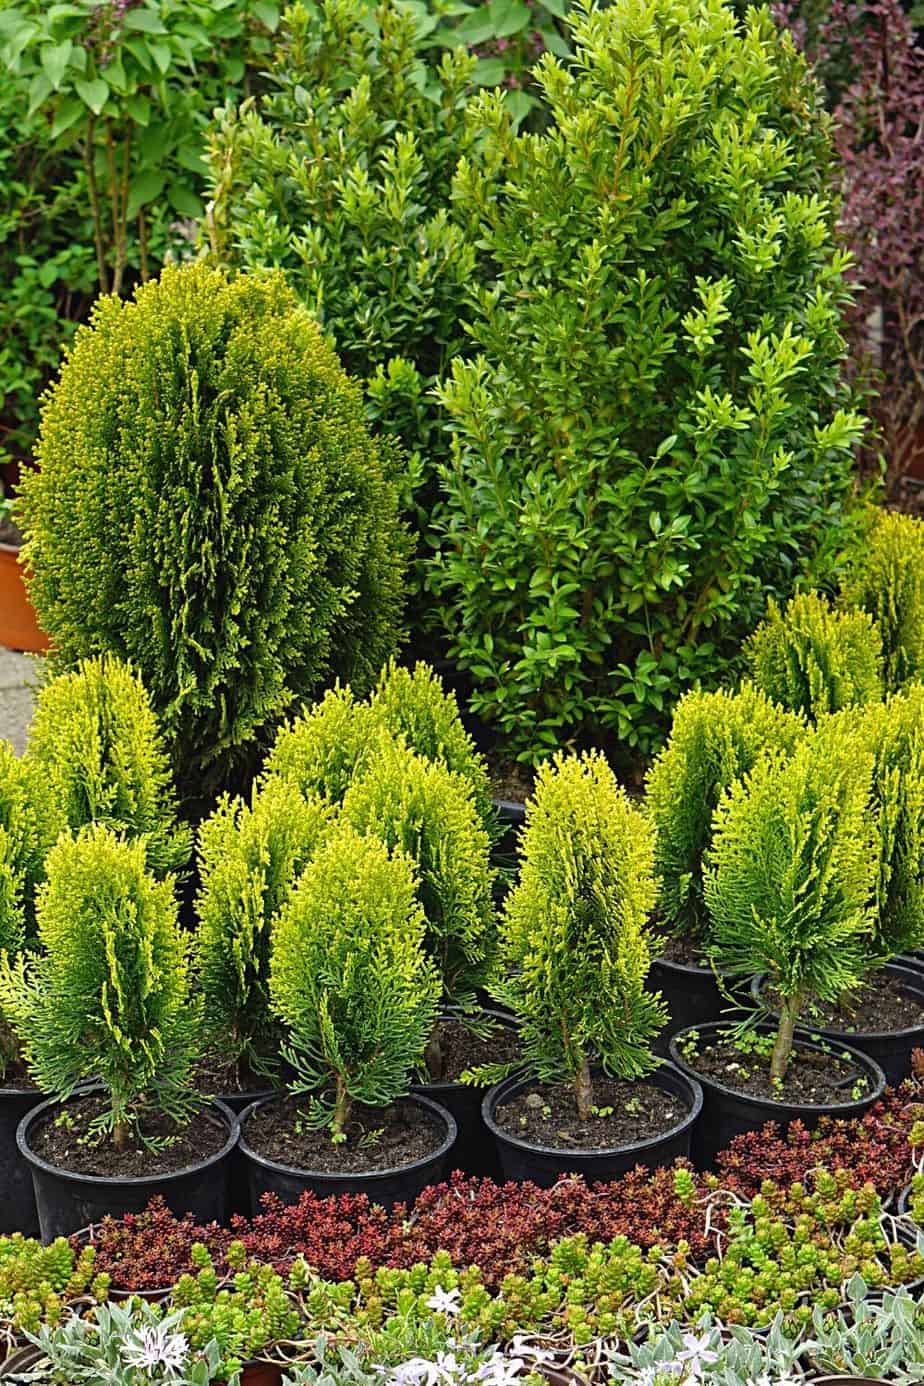 Though you can grow Dwarf Conifers in pots on your east-facing balcony, they can grow large after 20 to 30 years